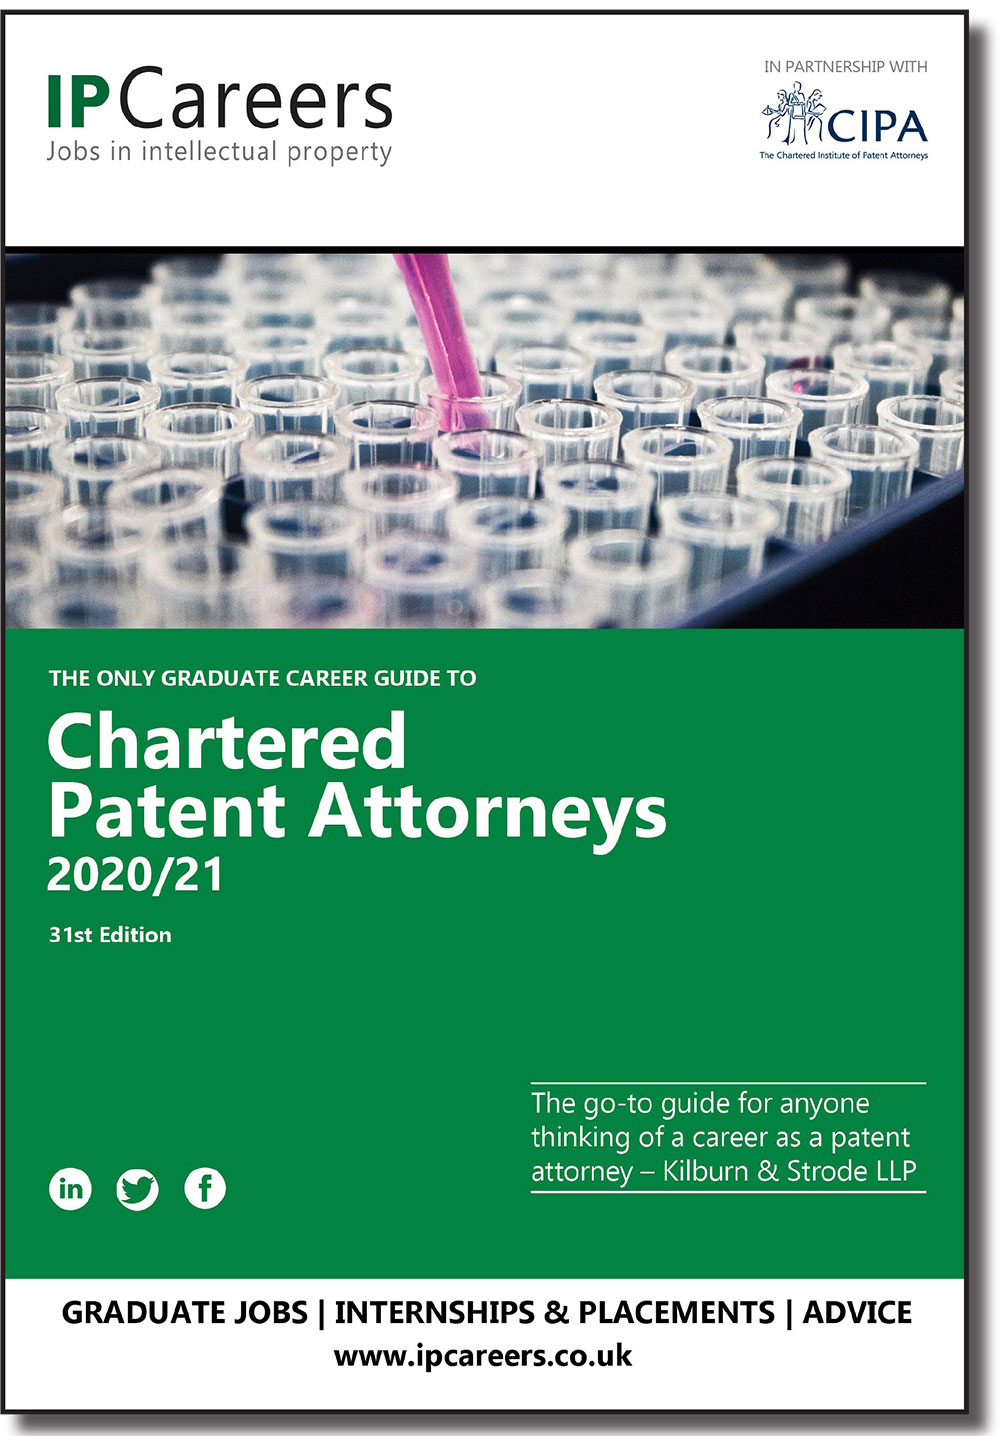 Chartered Patent Attorneys Guide - IP Careers